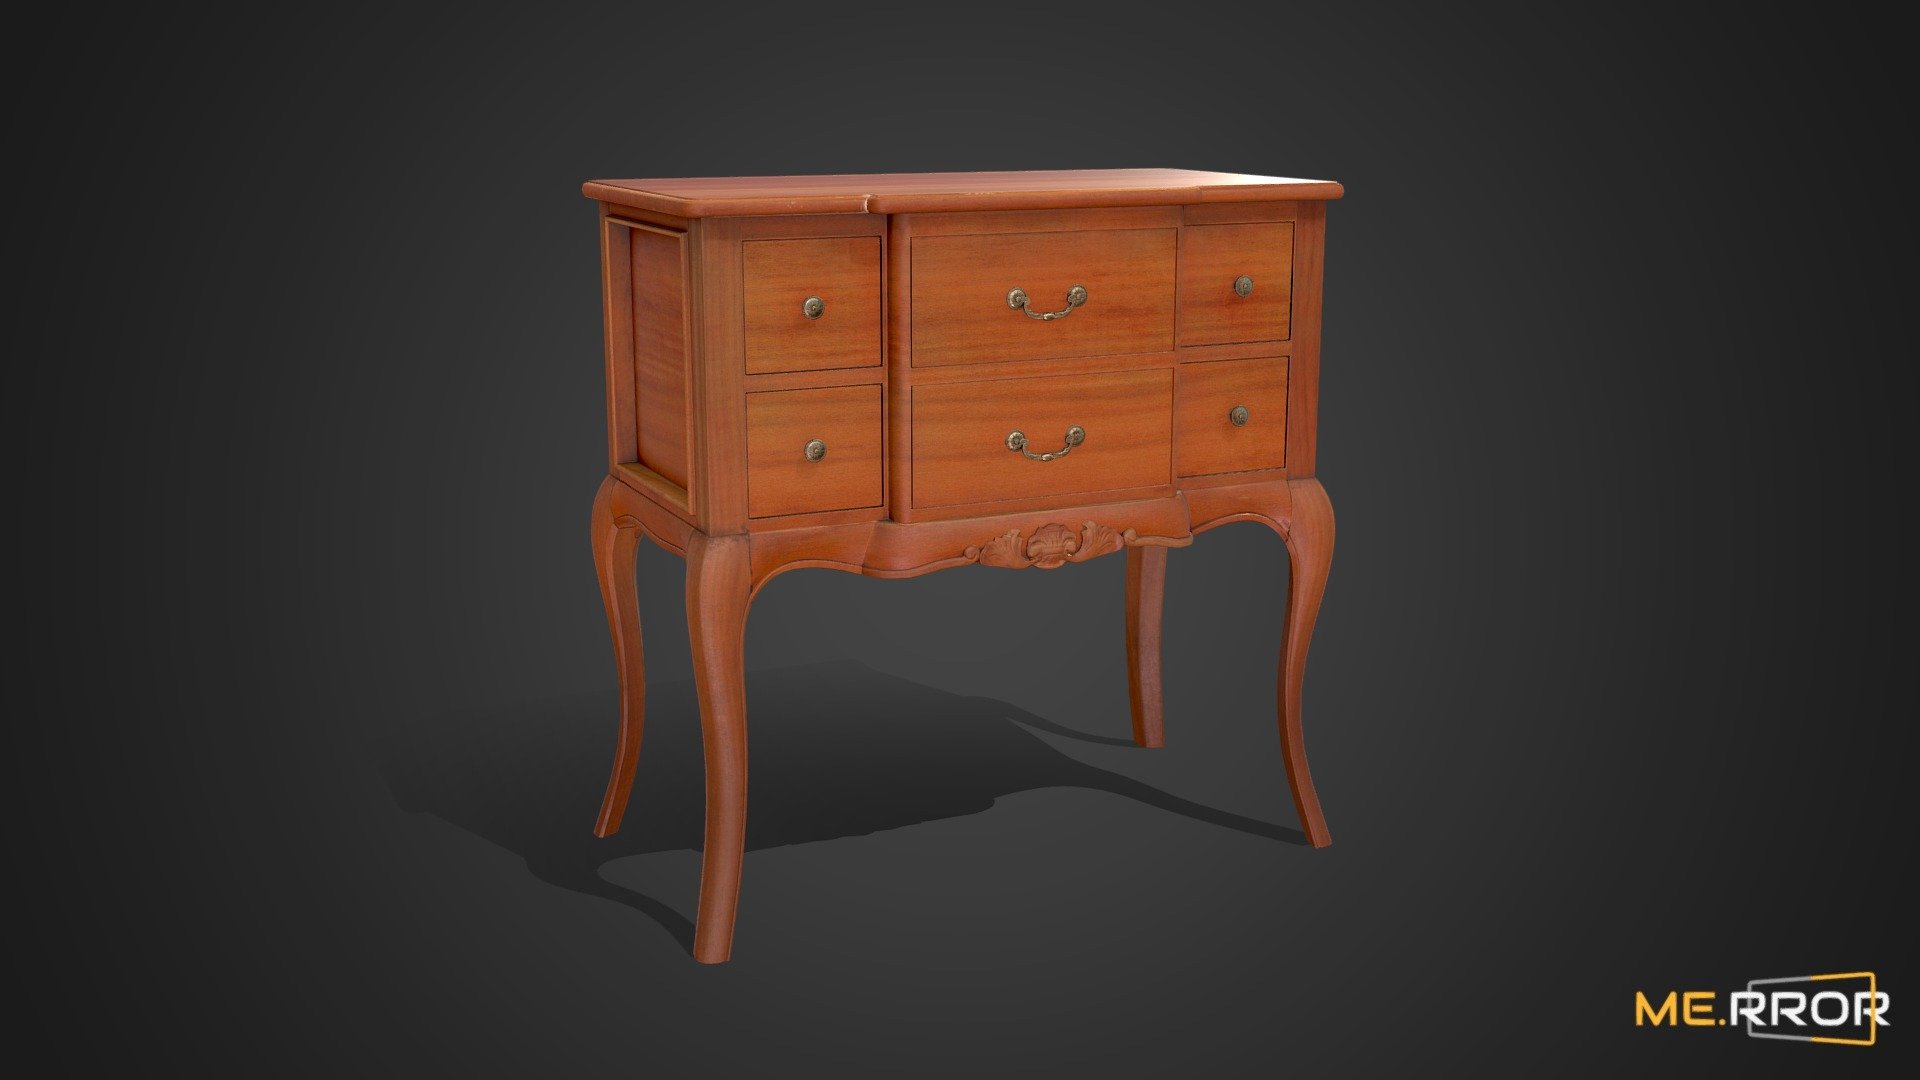 MERROR is a 3D Content PLATFORM which introduces various Asian assets to the 3D world


3DScanning #Photogrametry #ME.RROR - [Game-Ready] Antique Wooden Desk - Buy Royalty Free 3D model by ME.RROR Studio (@merror) 3d model